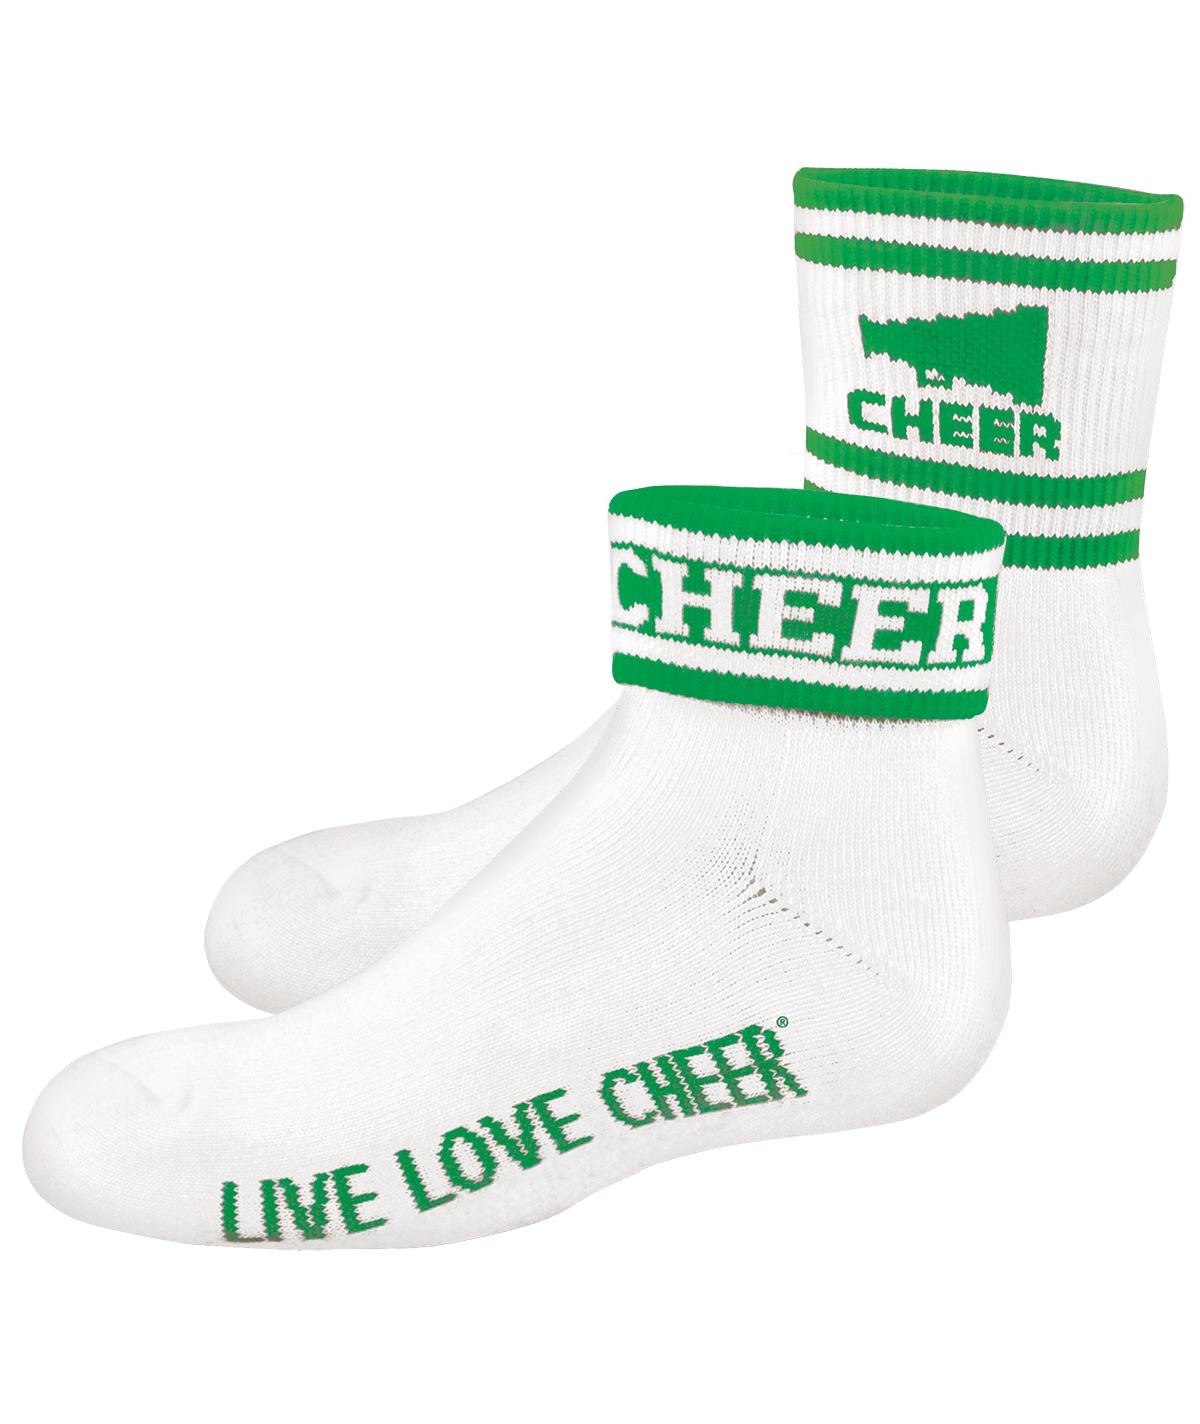 Chasse Flip Sock with Megaphone and Stripe